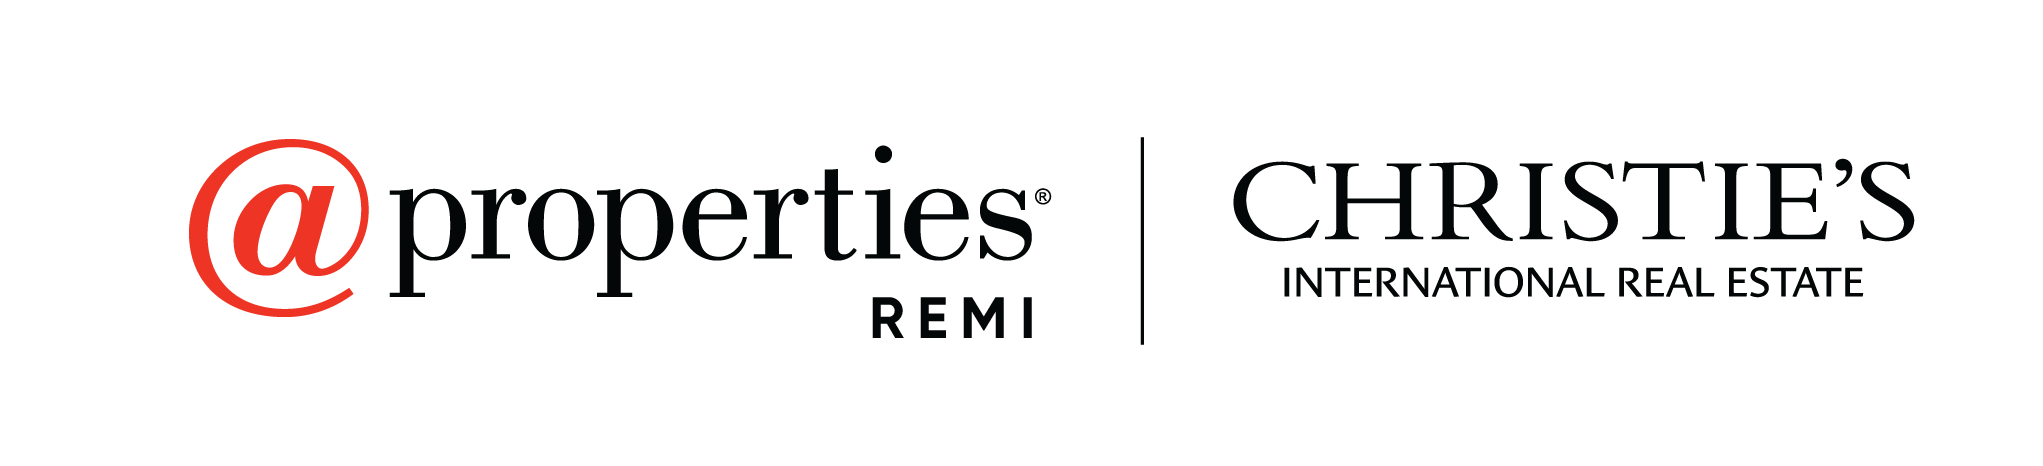 Affiliate logos for @properties and Christie's International Real Estate